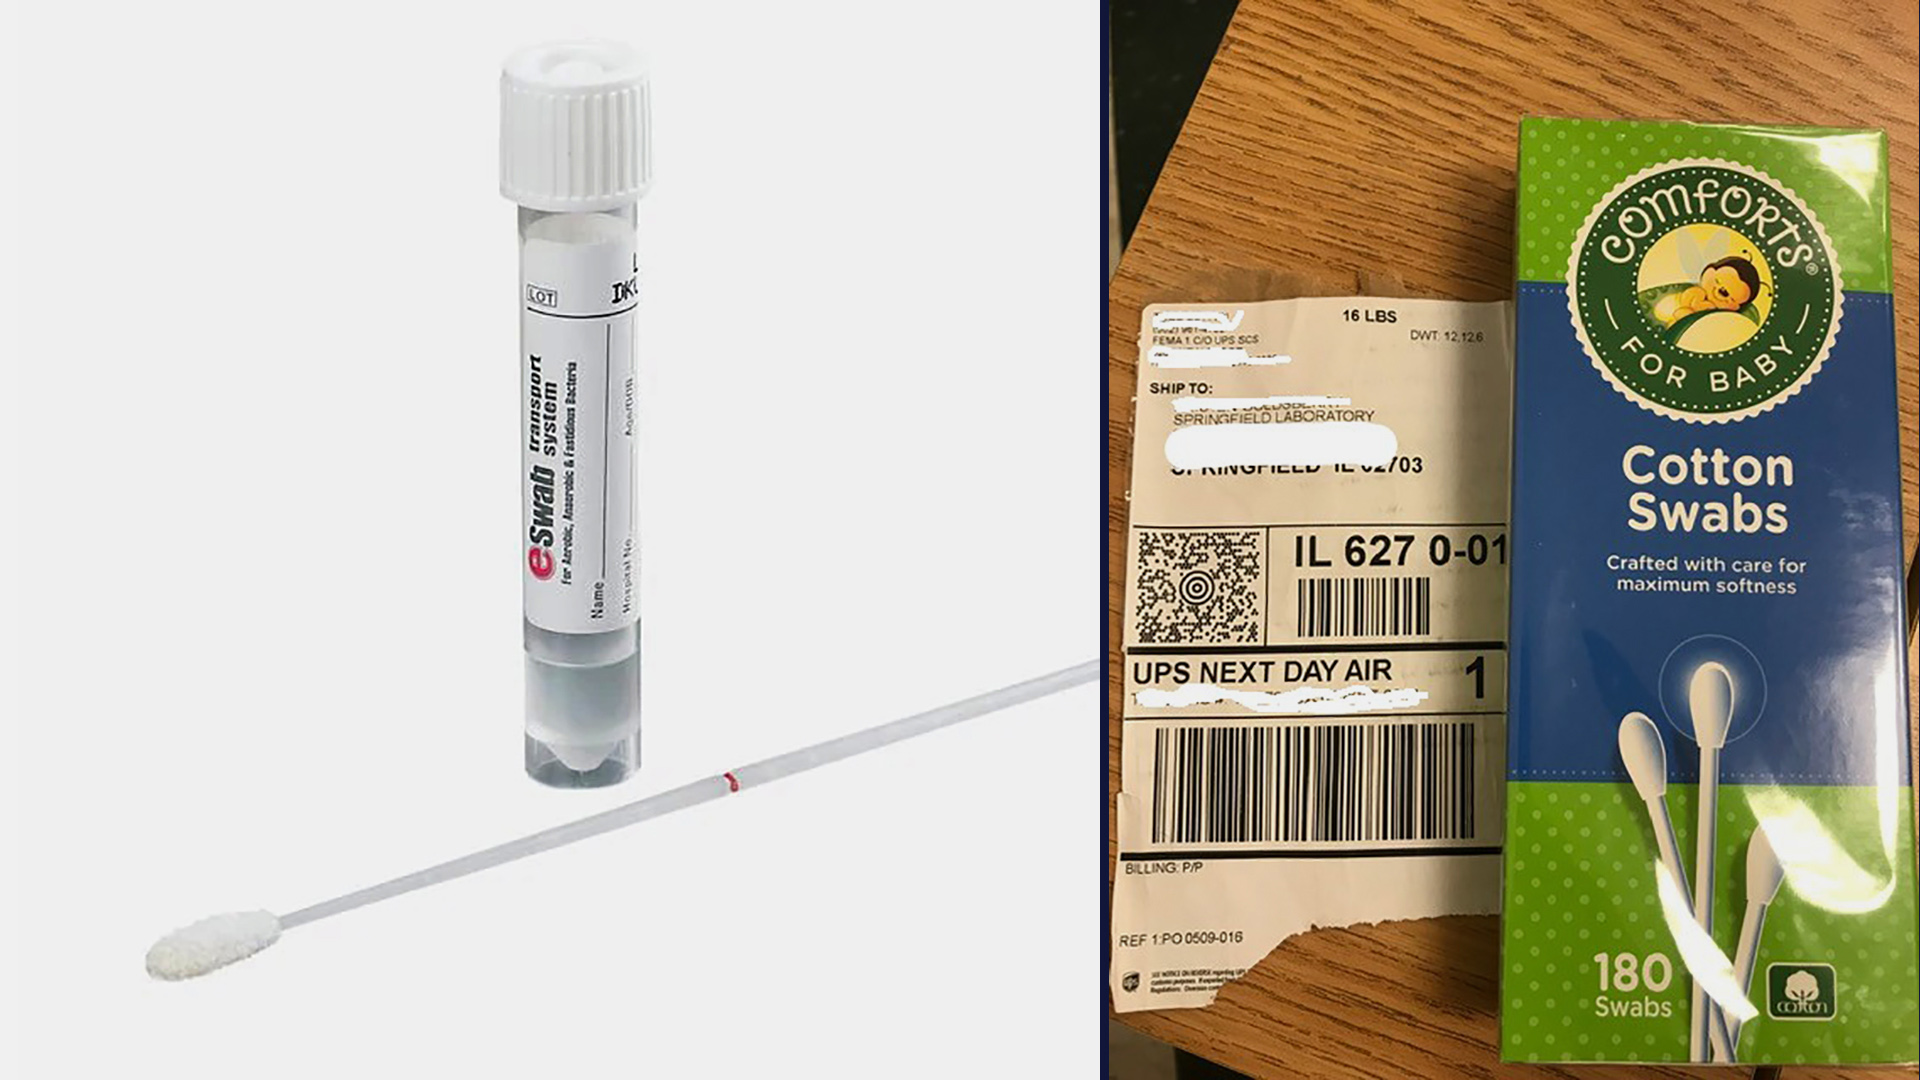 Shipment Of Swabs For Covid 19 Testing Appears To Show Another Mix Up From Federal Government Chicago News Wttw